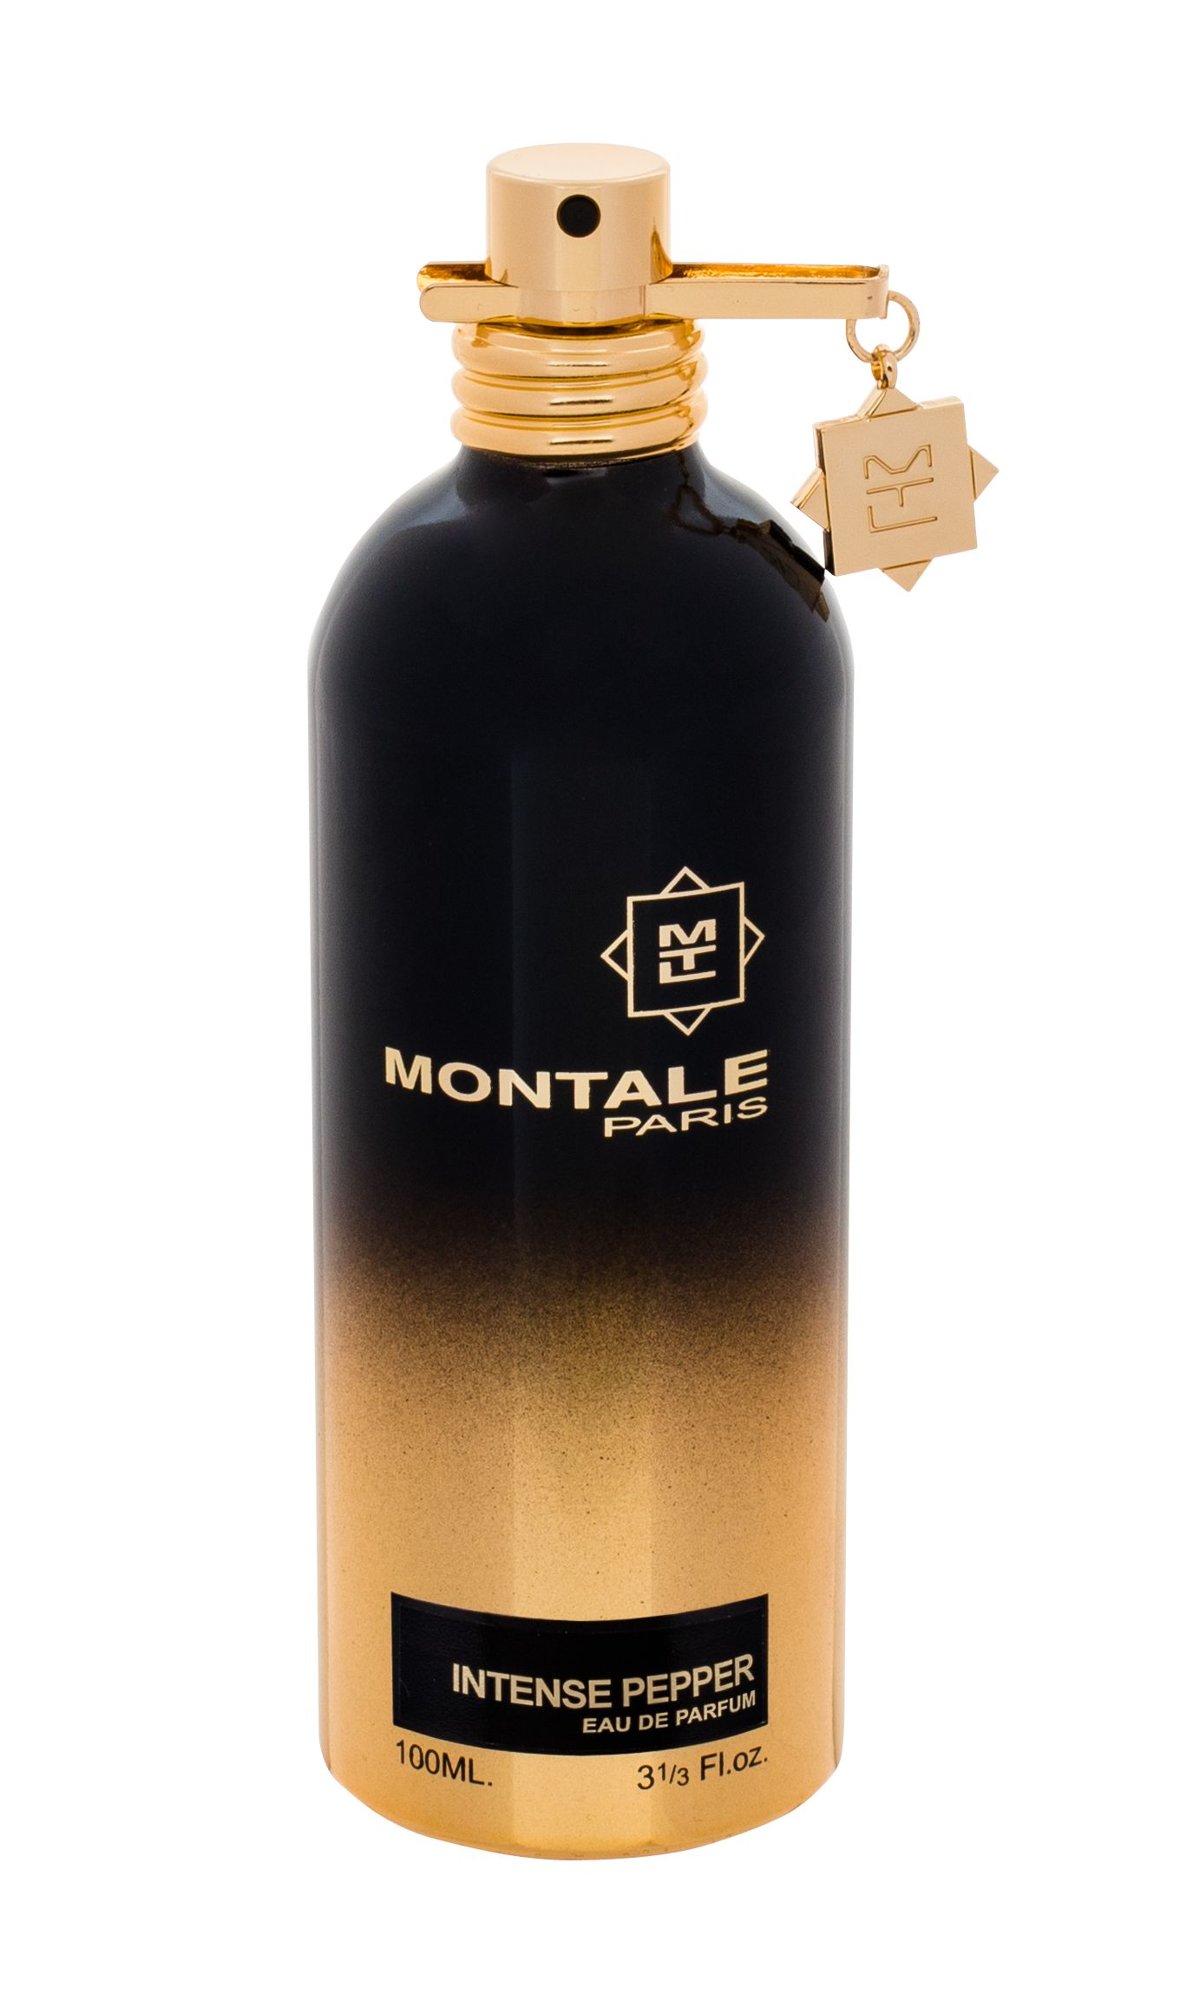 Montale vetiver. Духи Монталь intense Pepper. Montale Aoud Night, 100 ml. Montale Amber Musk EDP (100 мл). Montale Leather Patchouli.